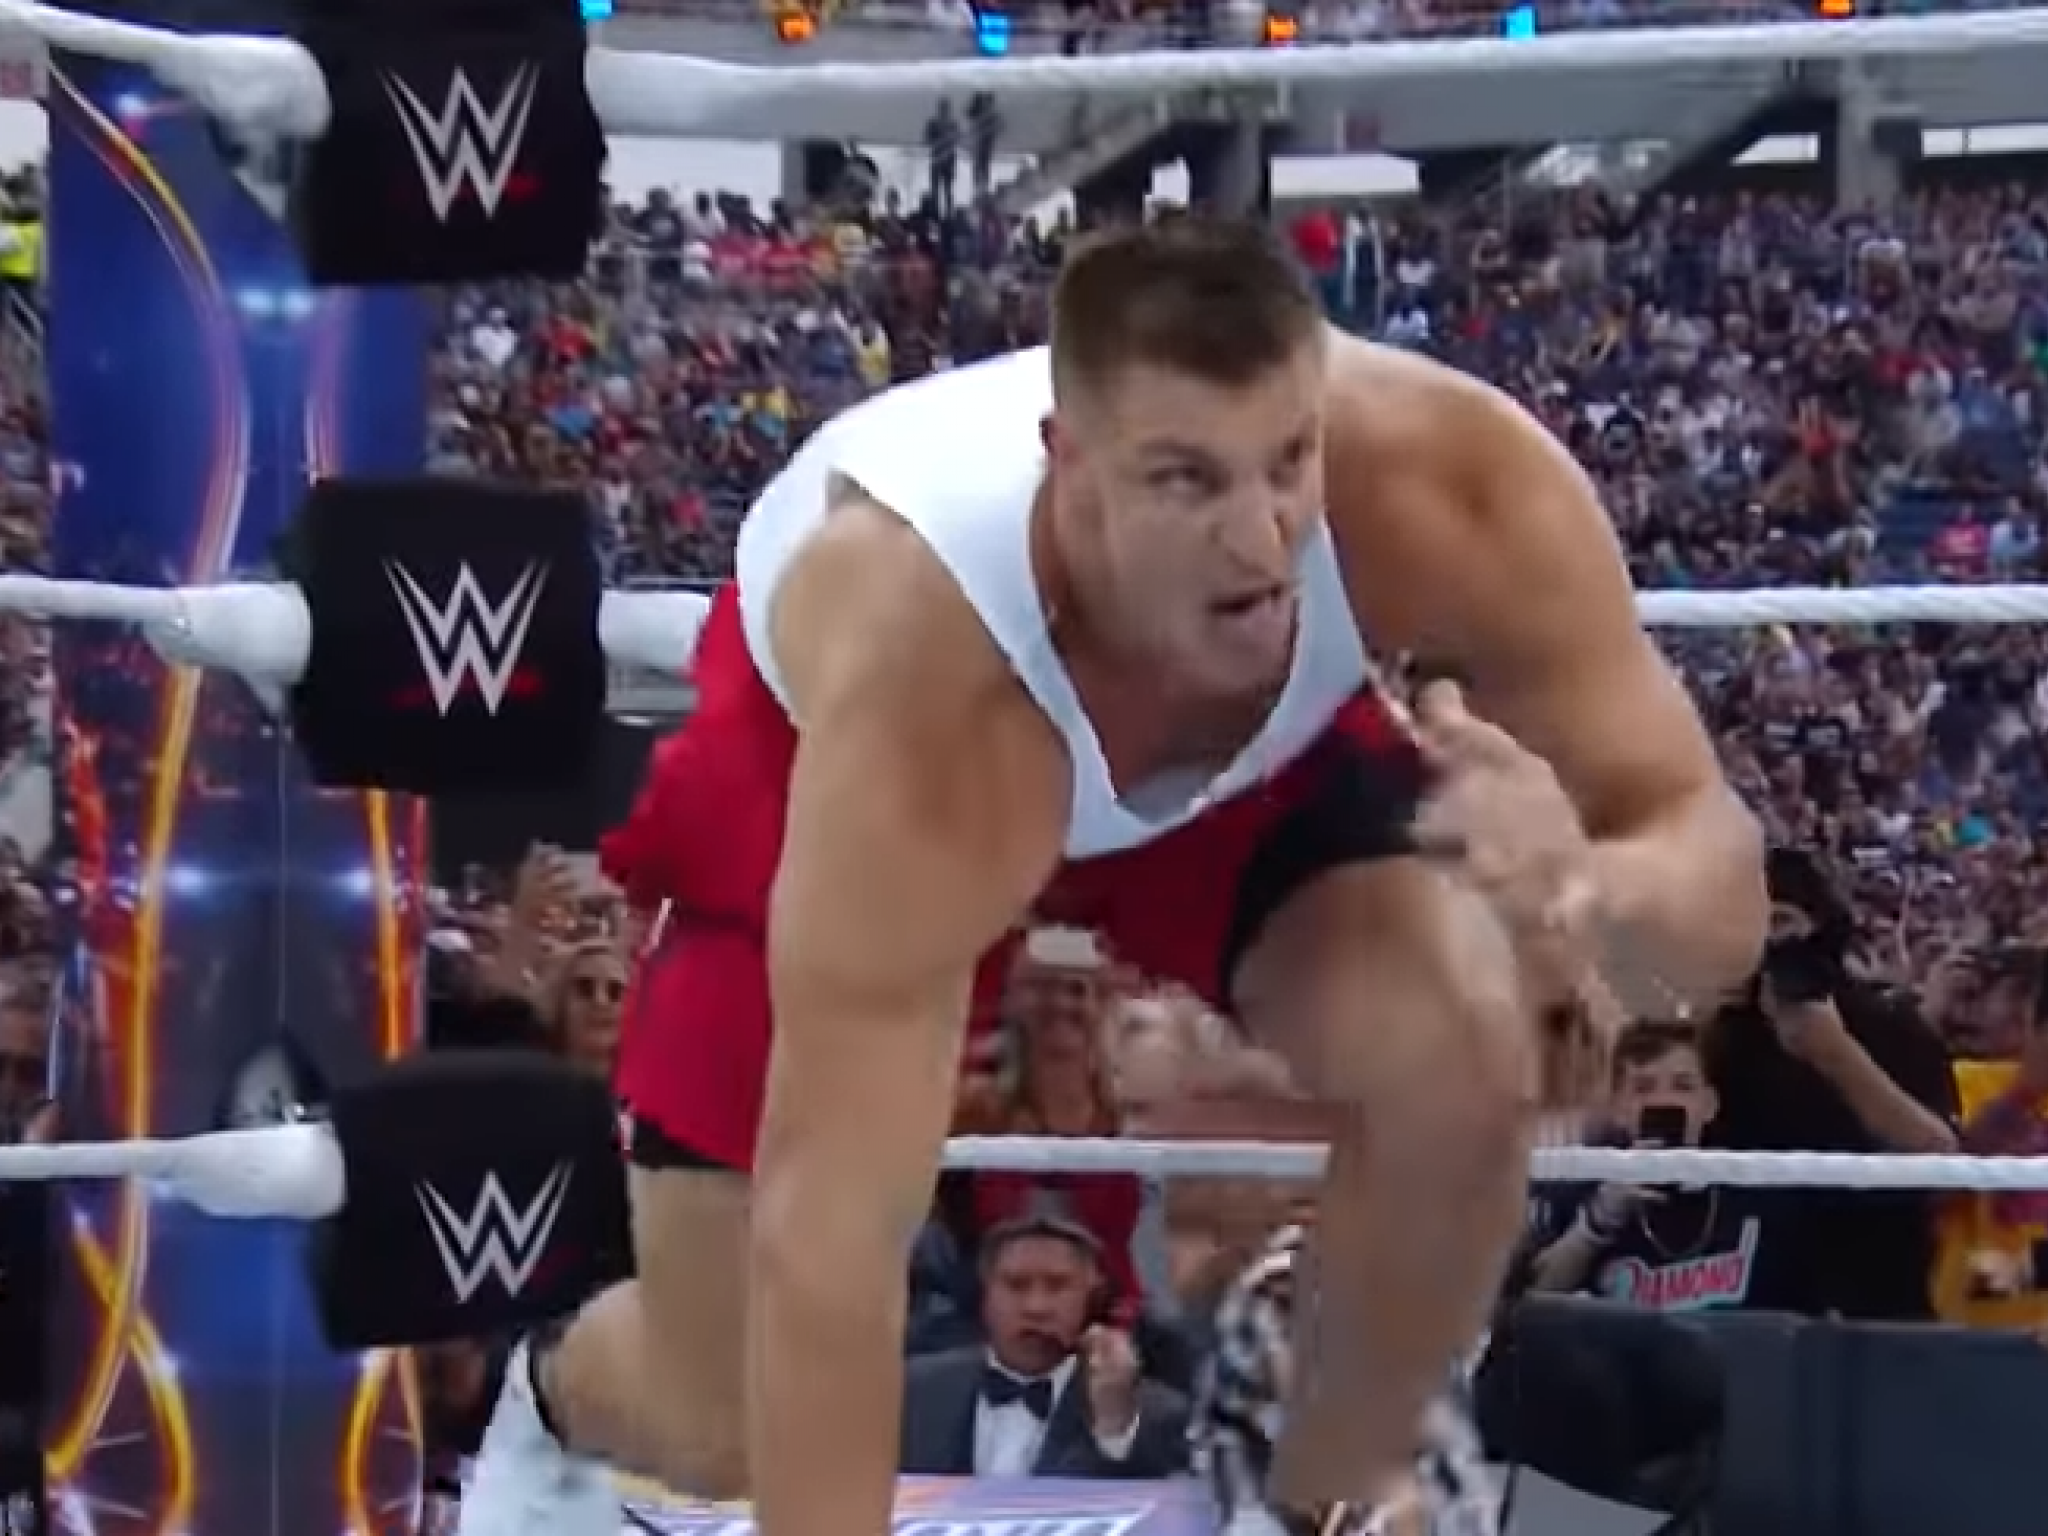  rob-gronkowski-signs-deal-with-wwe-joins-elite-list-of-nfl-players-to-compete-in-the-wrestling-ring 